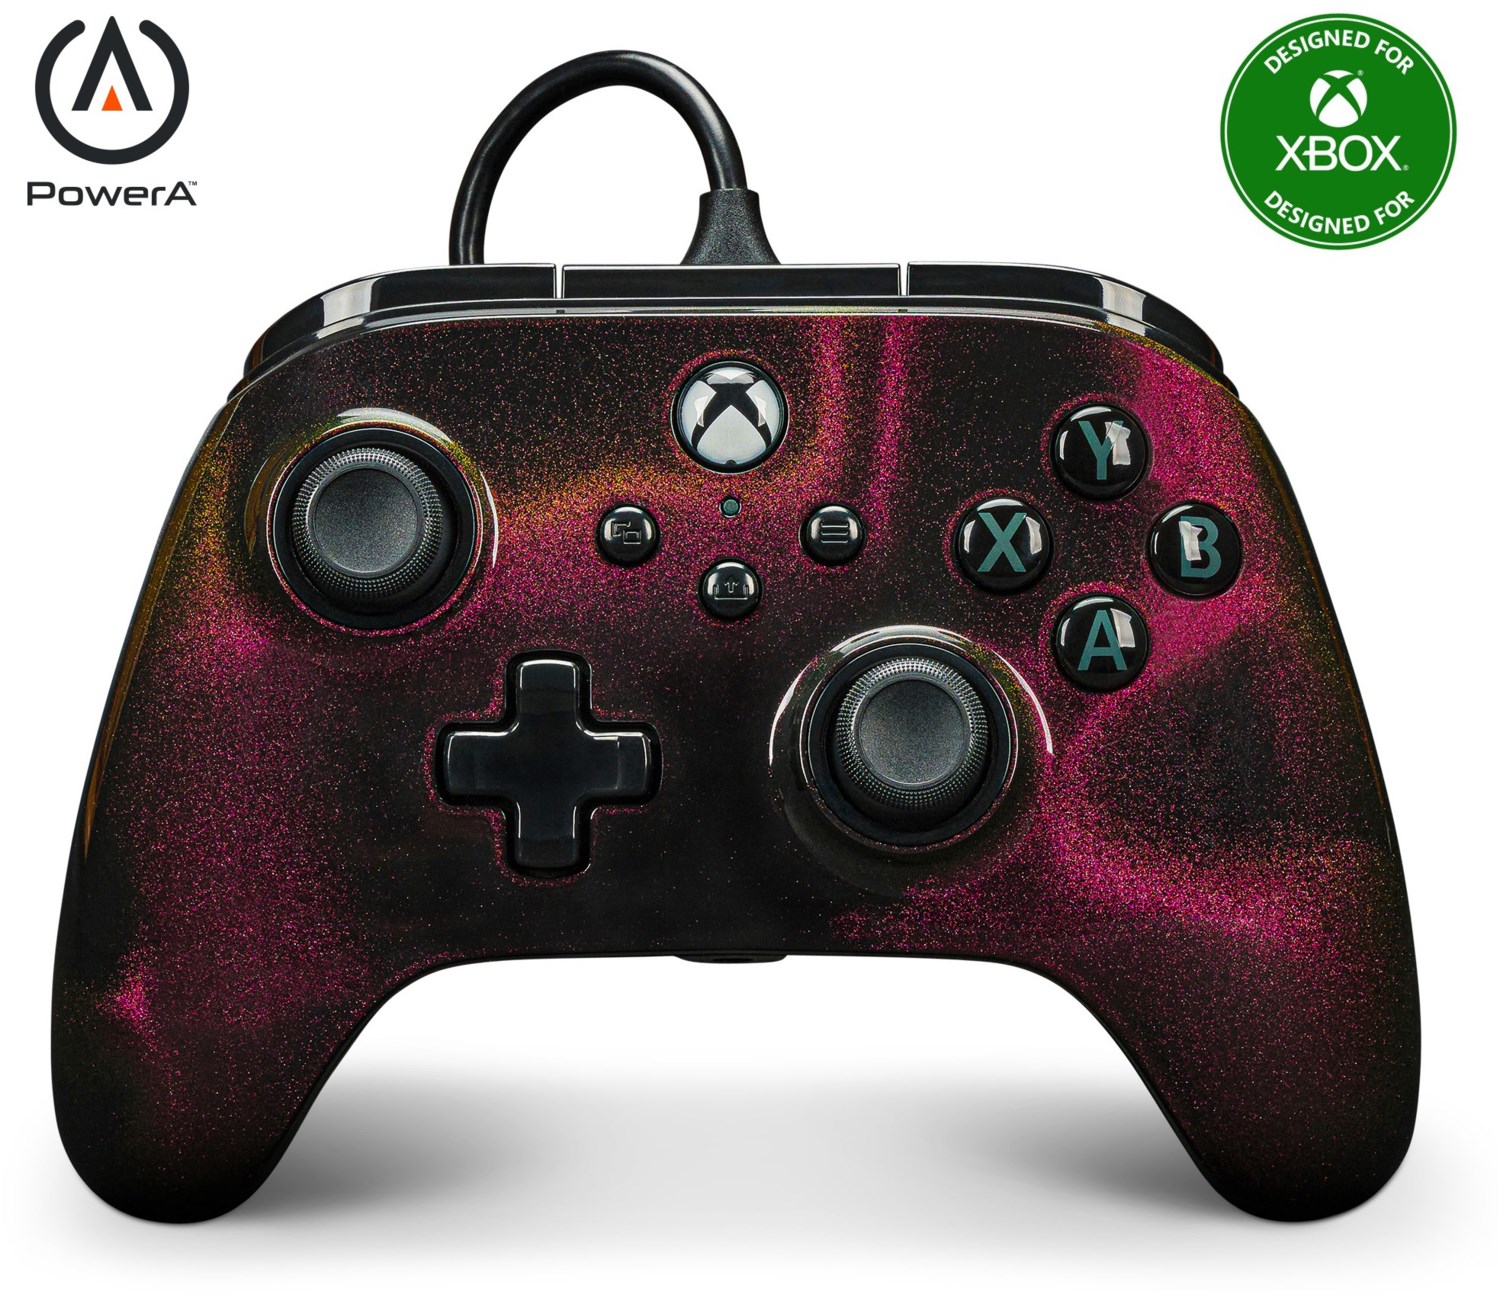 Advantage Wired Controller